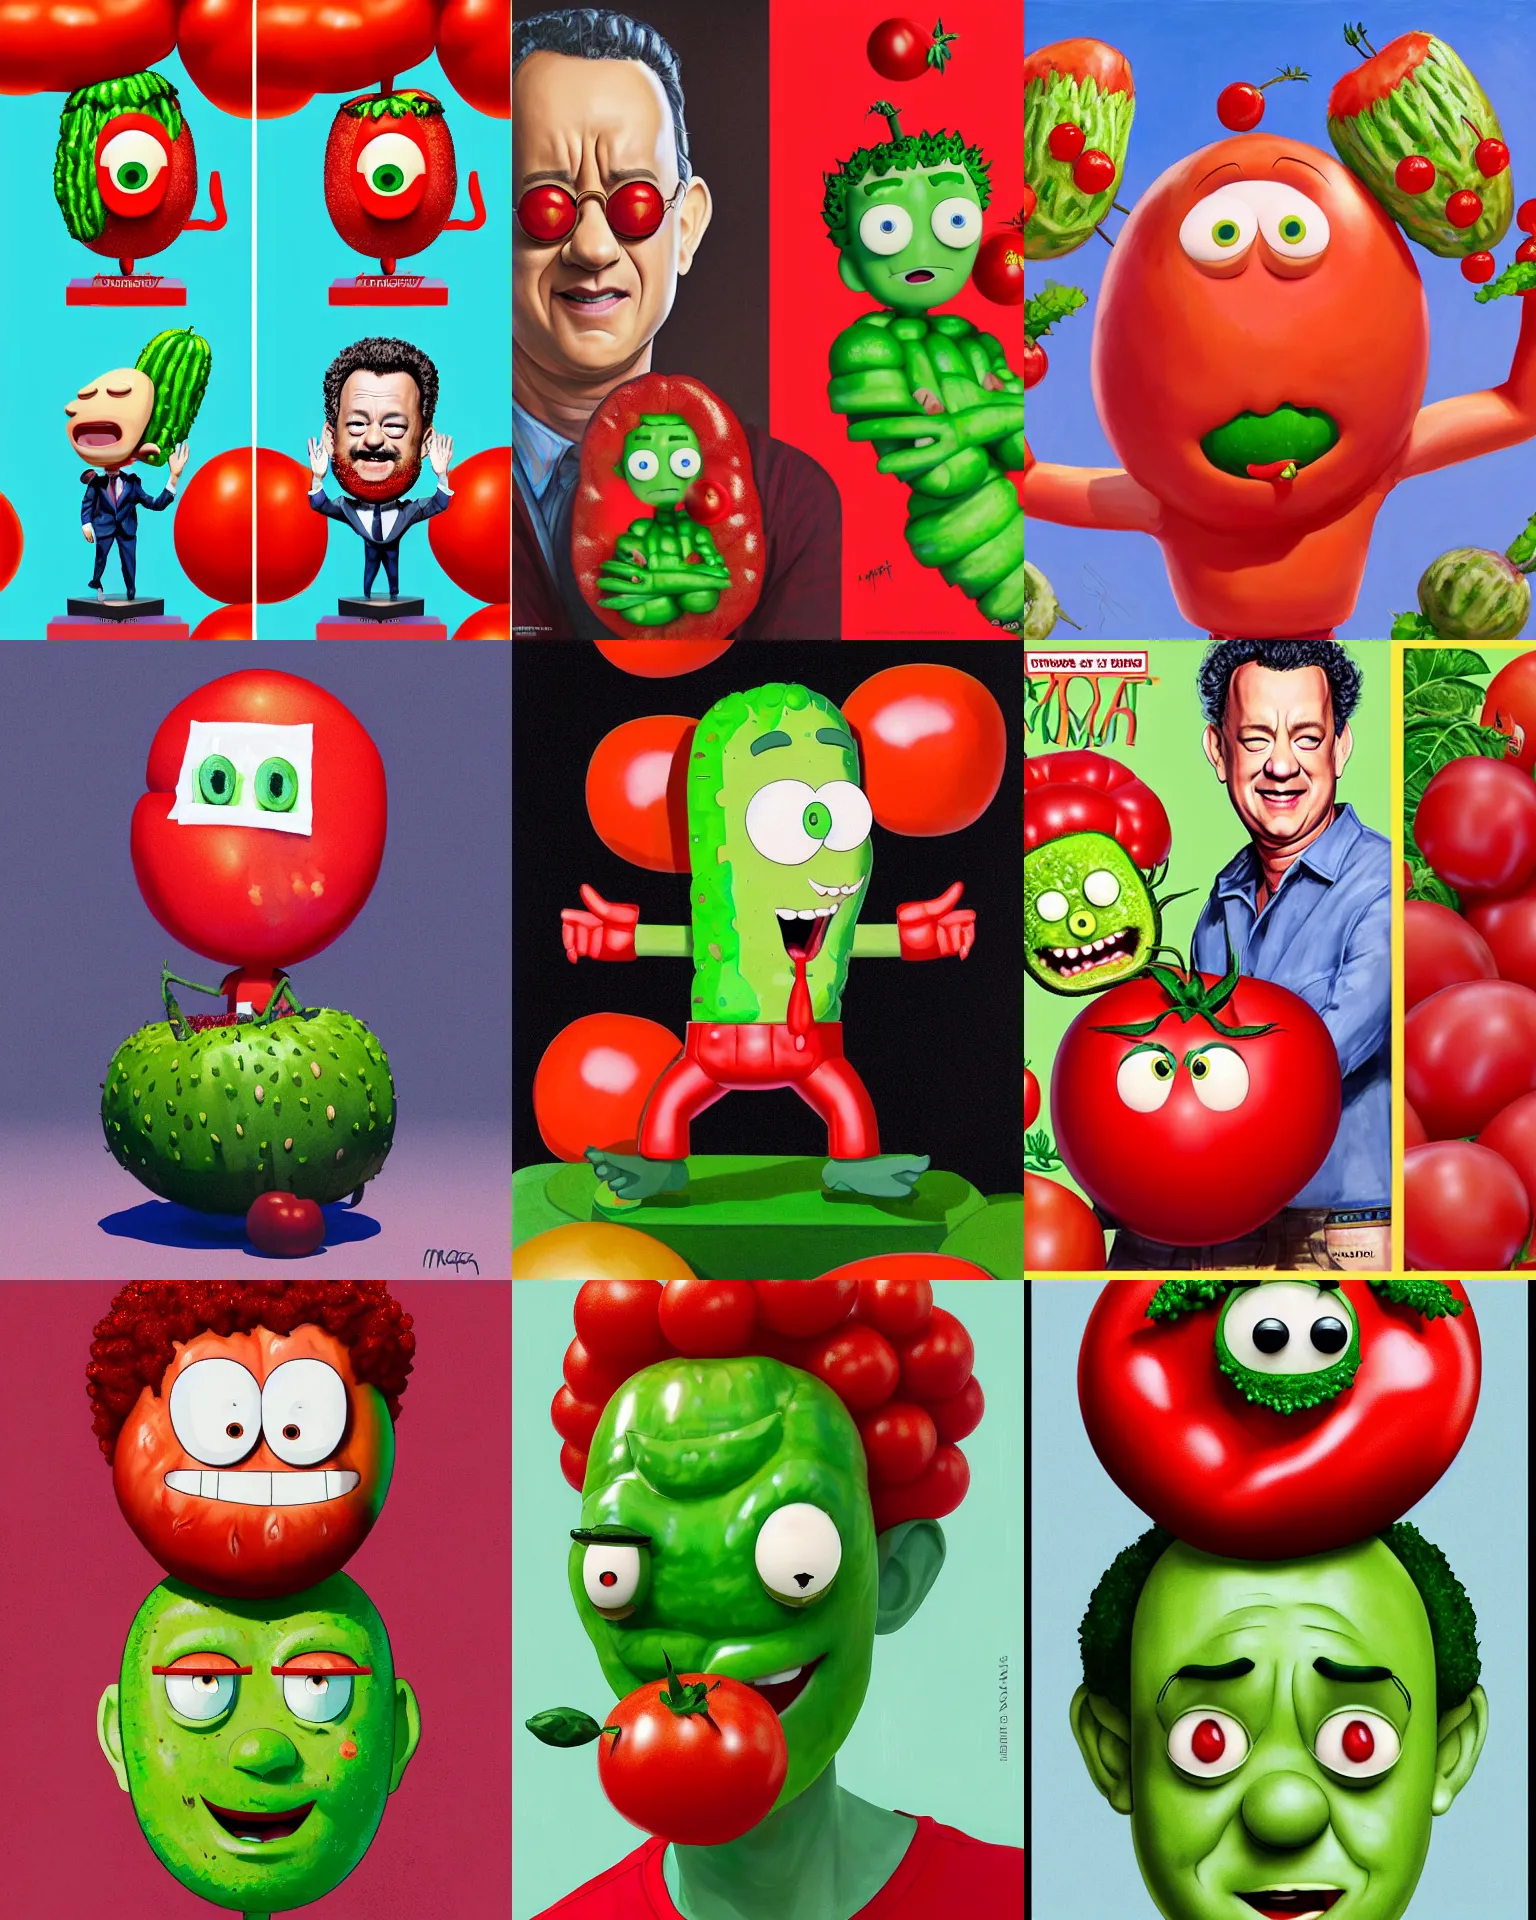 Prompt: tom hanks as tomato hanks mascot, his skin is red with green hair representing the stem, pickle rick, dramatic lighting, london fashion week, bedazzled fruit costumes, shaded lighting poster by magali villeneuve, artgerm, jeremy lipkin and michael garmash, rob rey and kentaro miura style, trending on art station